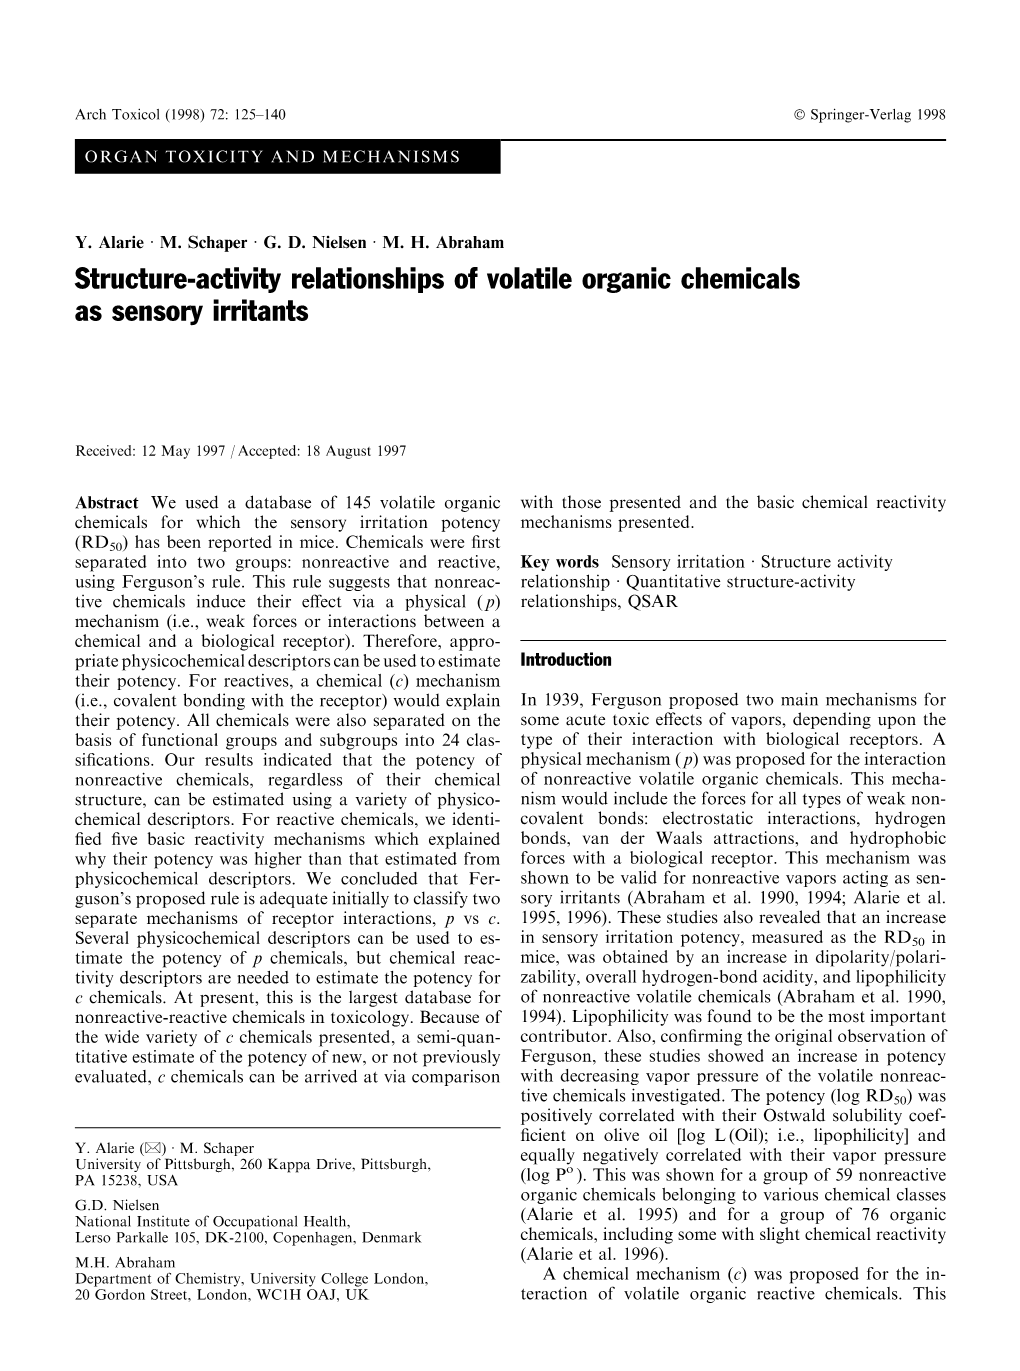 Structure-Activity Relationships of Volatile Organic Chemicals As Sensory Irritants